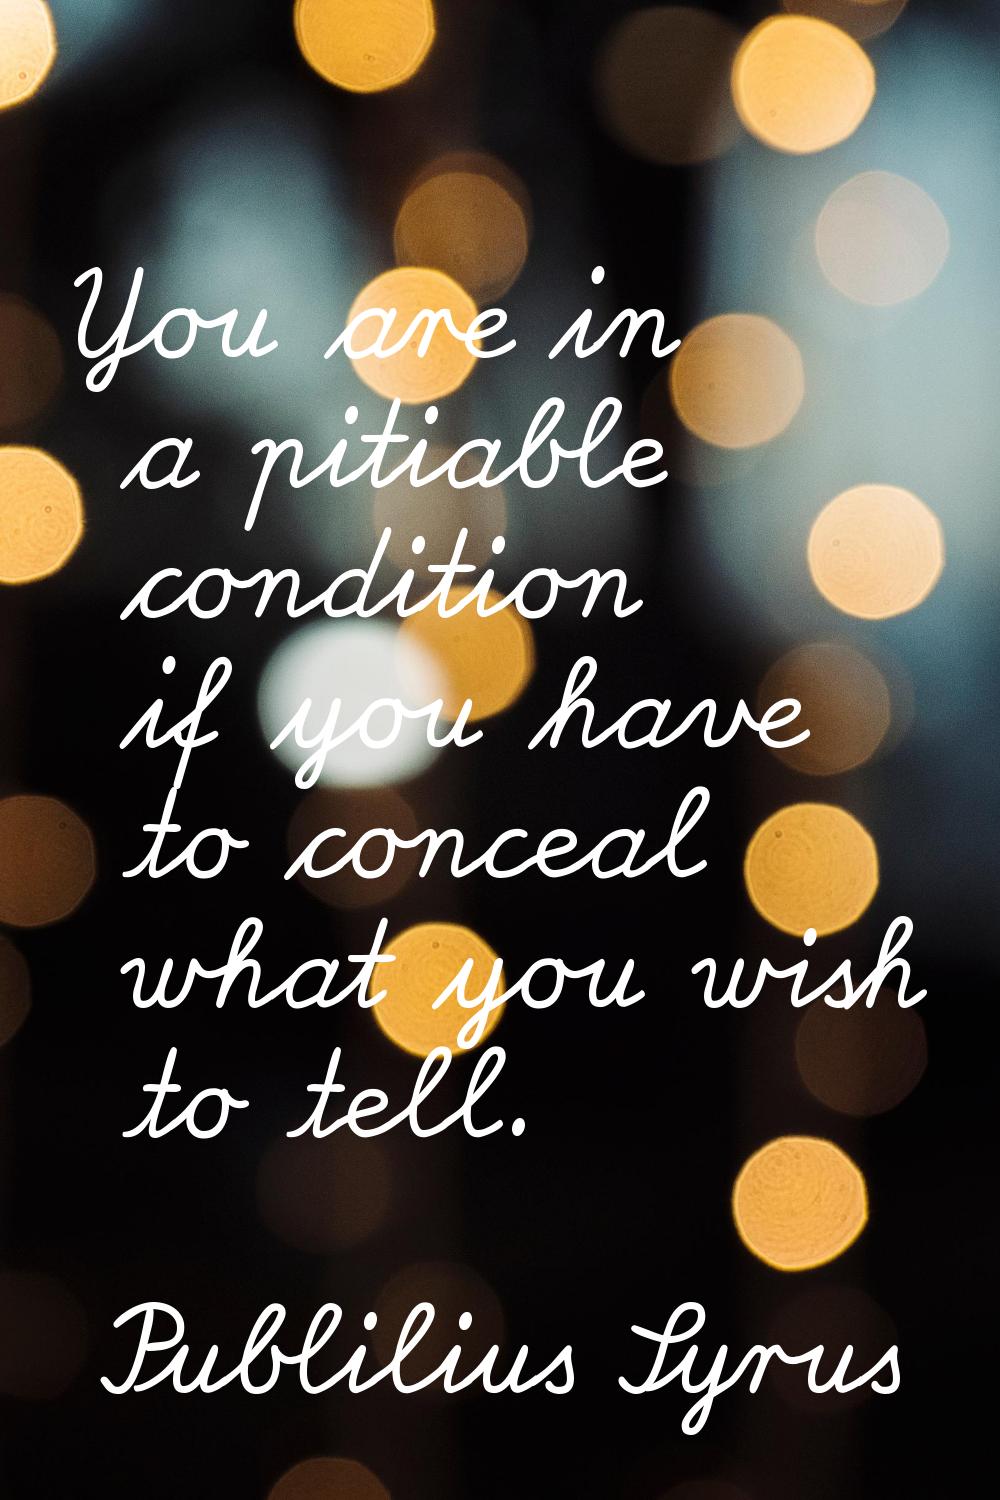 You are in a pitiable condition if you have to conceal what you wish to tell.